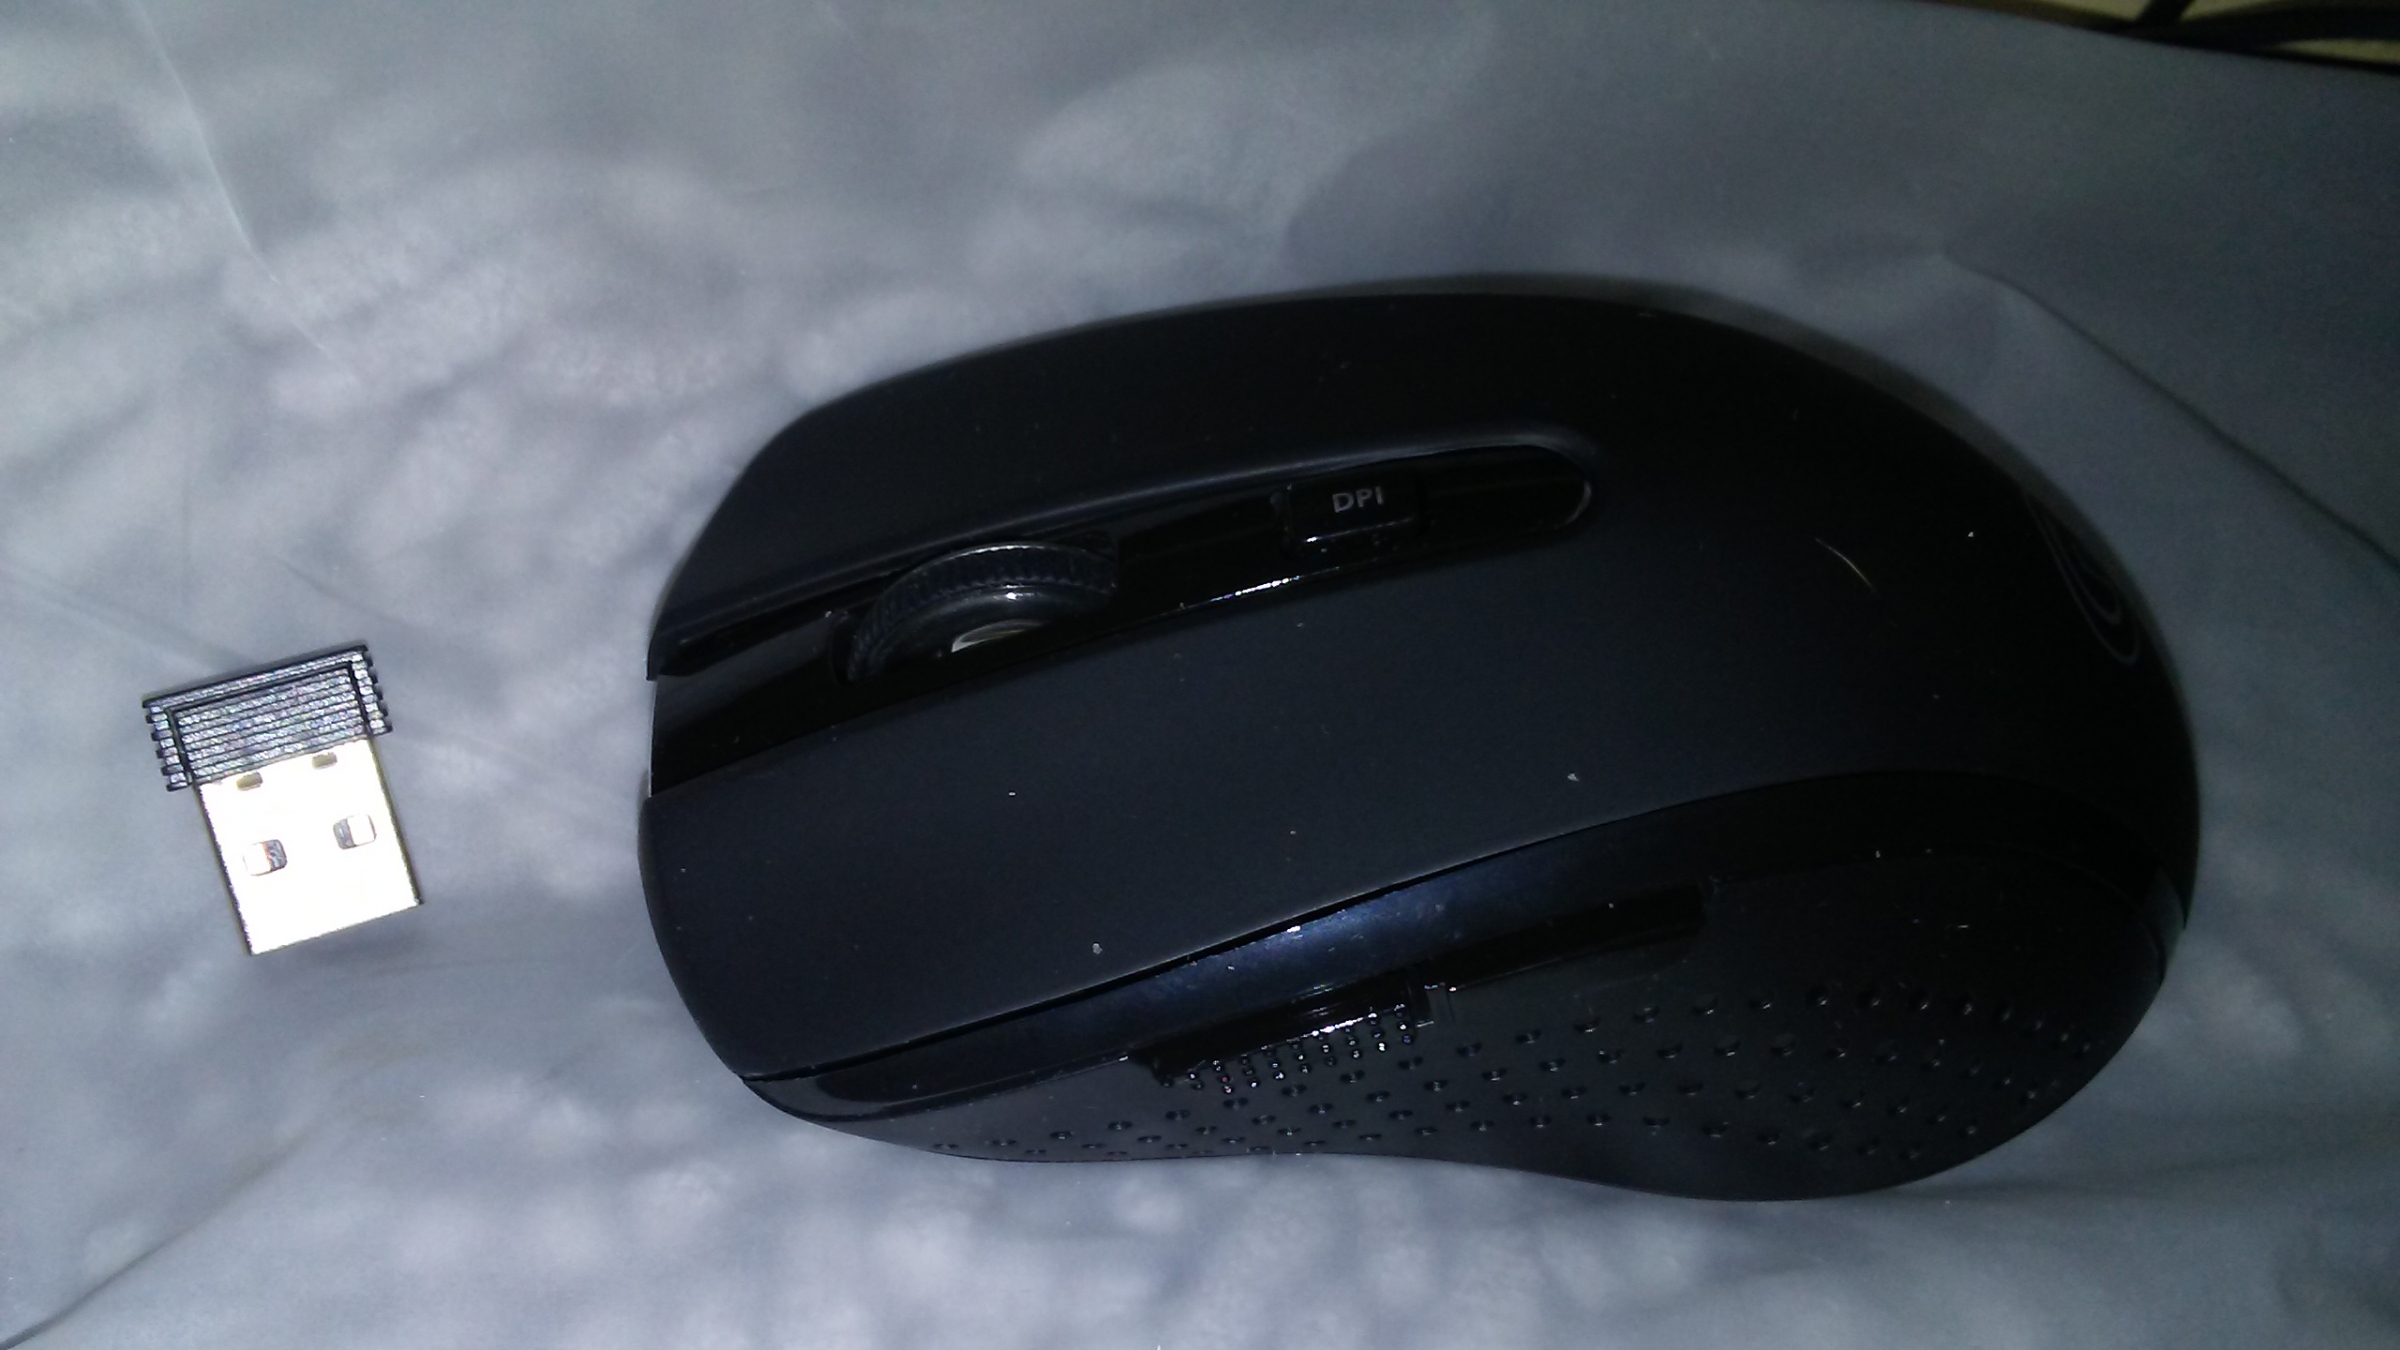 Inexpensive optical mouse that works well and is wireless and easily portable